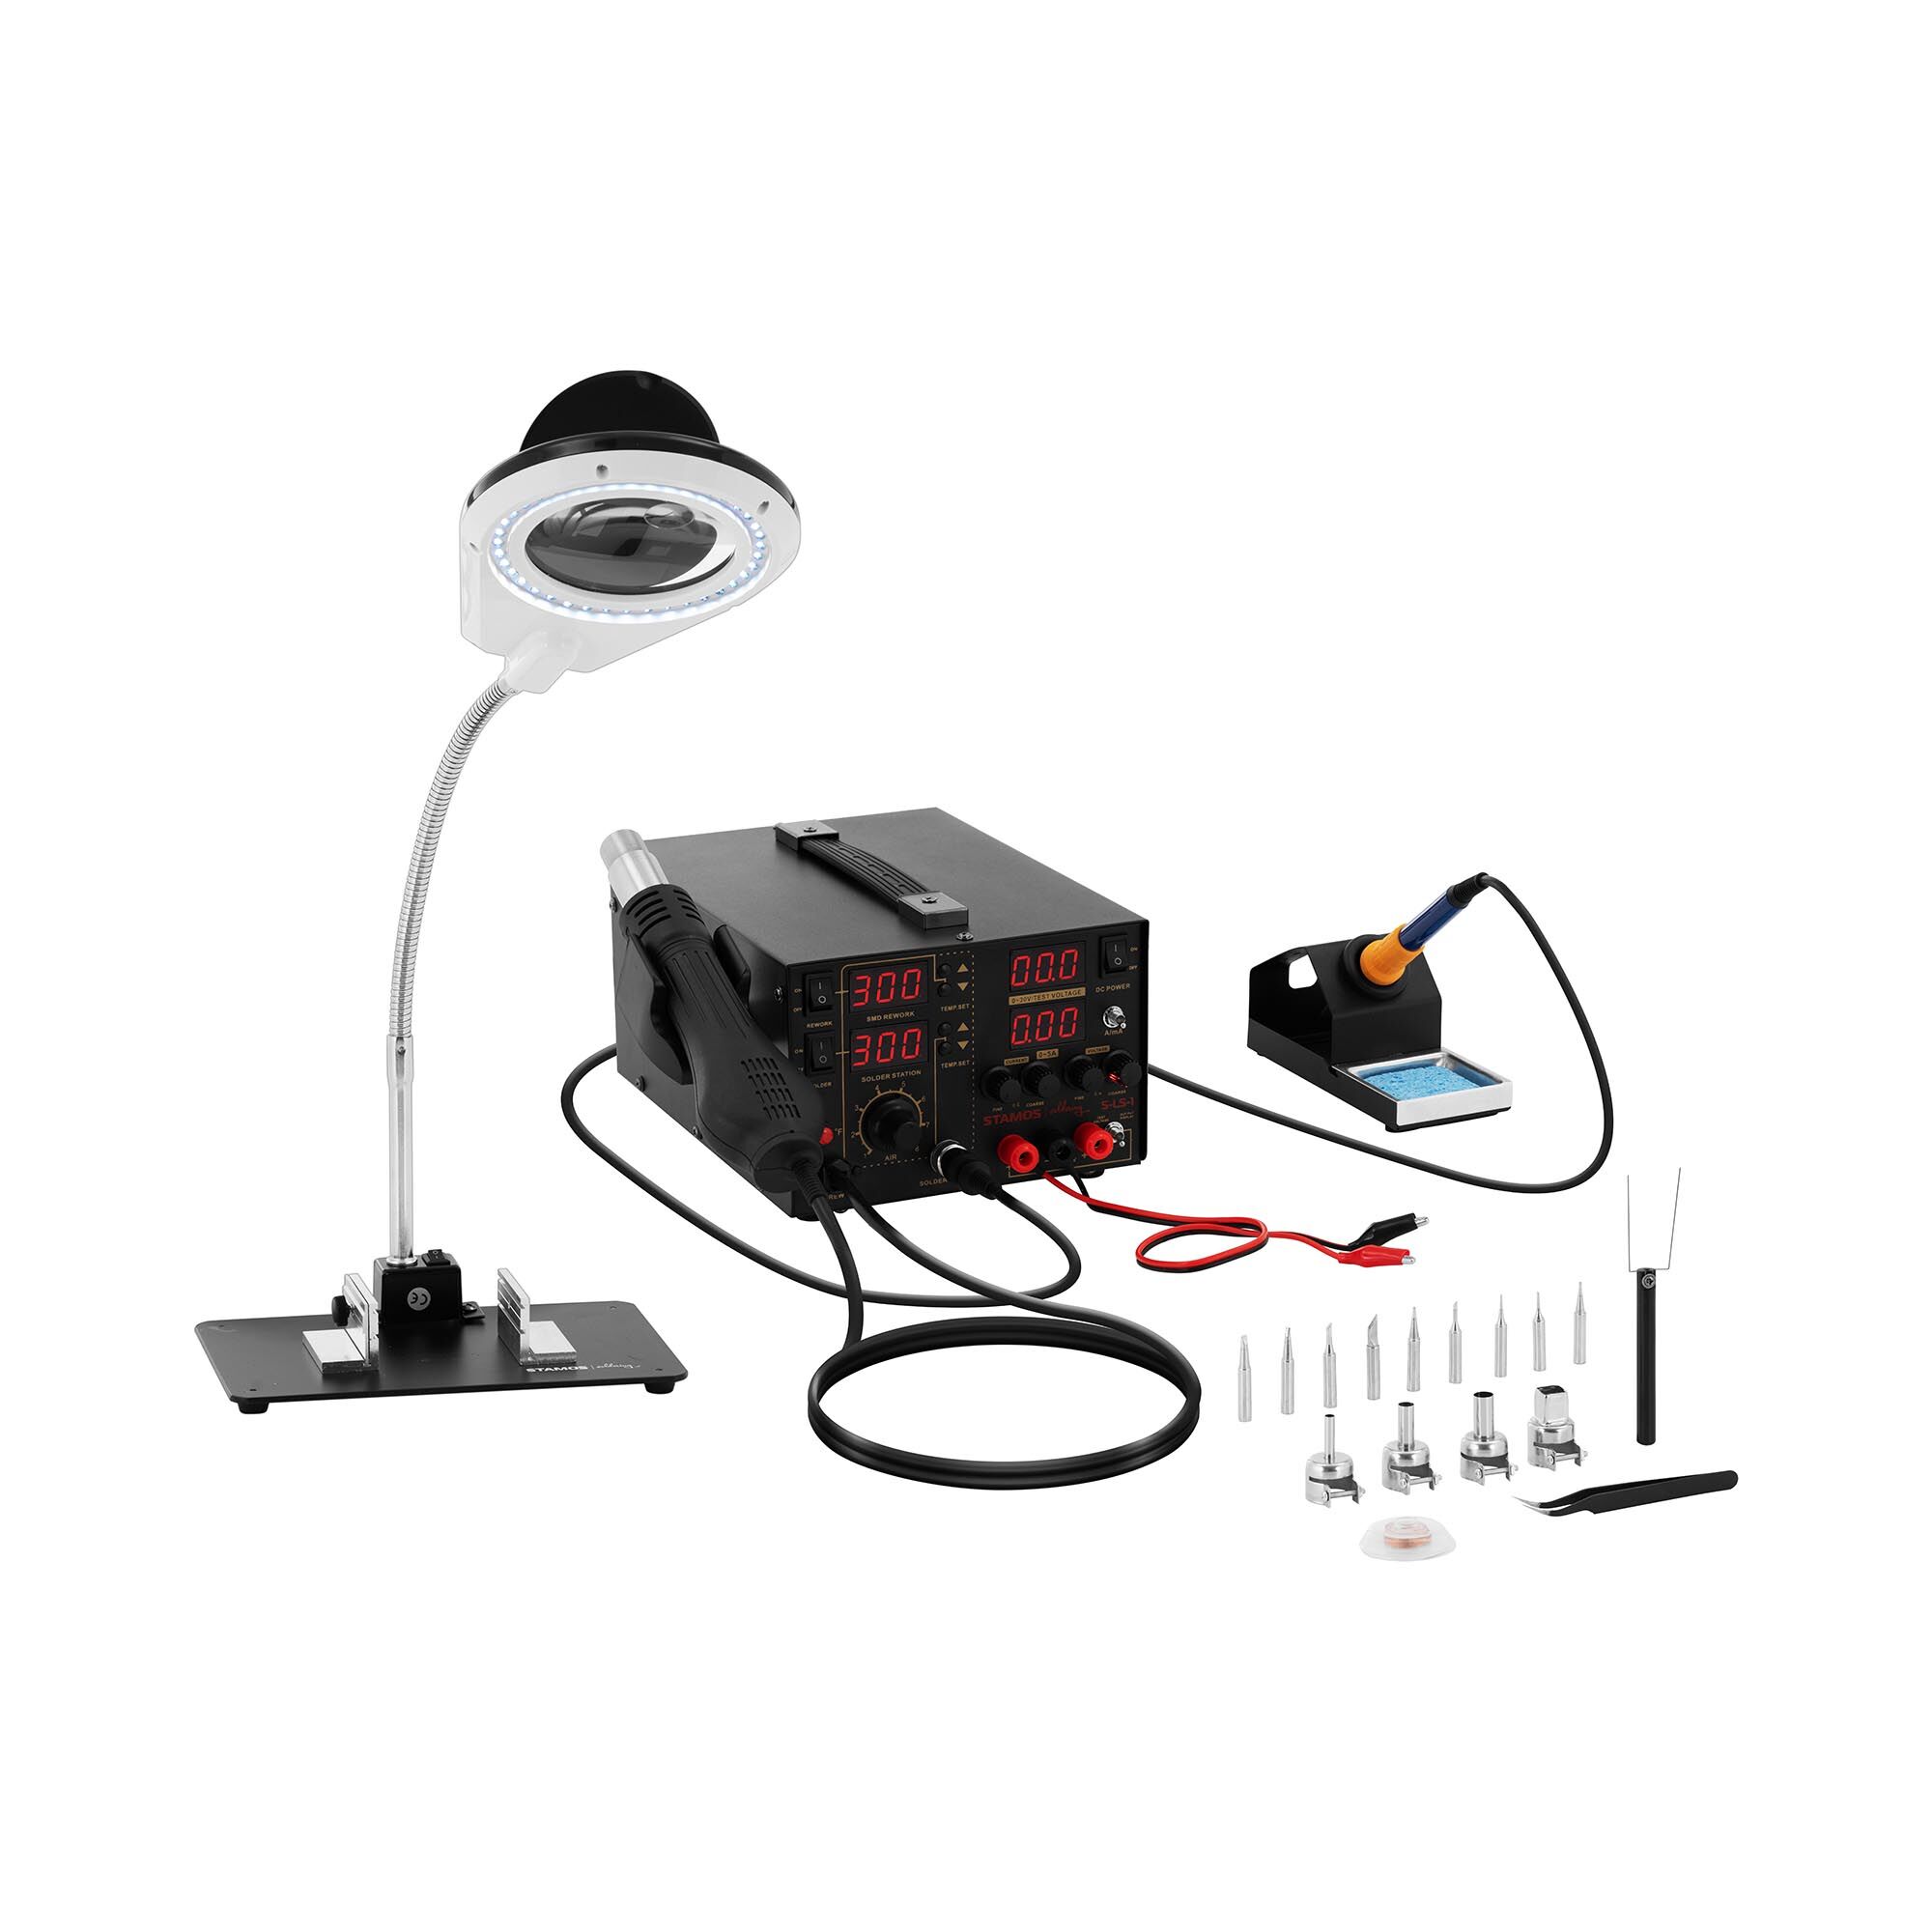 Stamos Soldering Set Soldering Station with integrated Mains Adapter + Accessoires